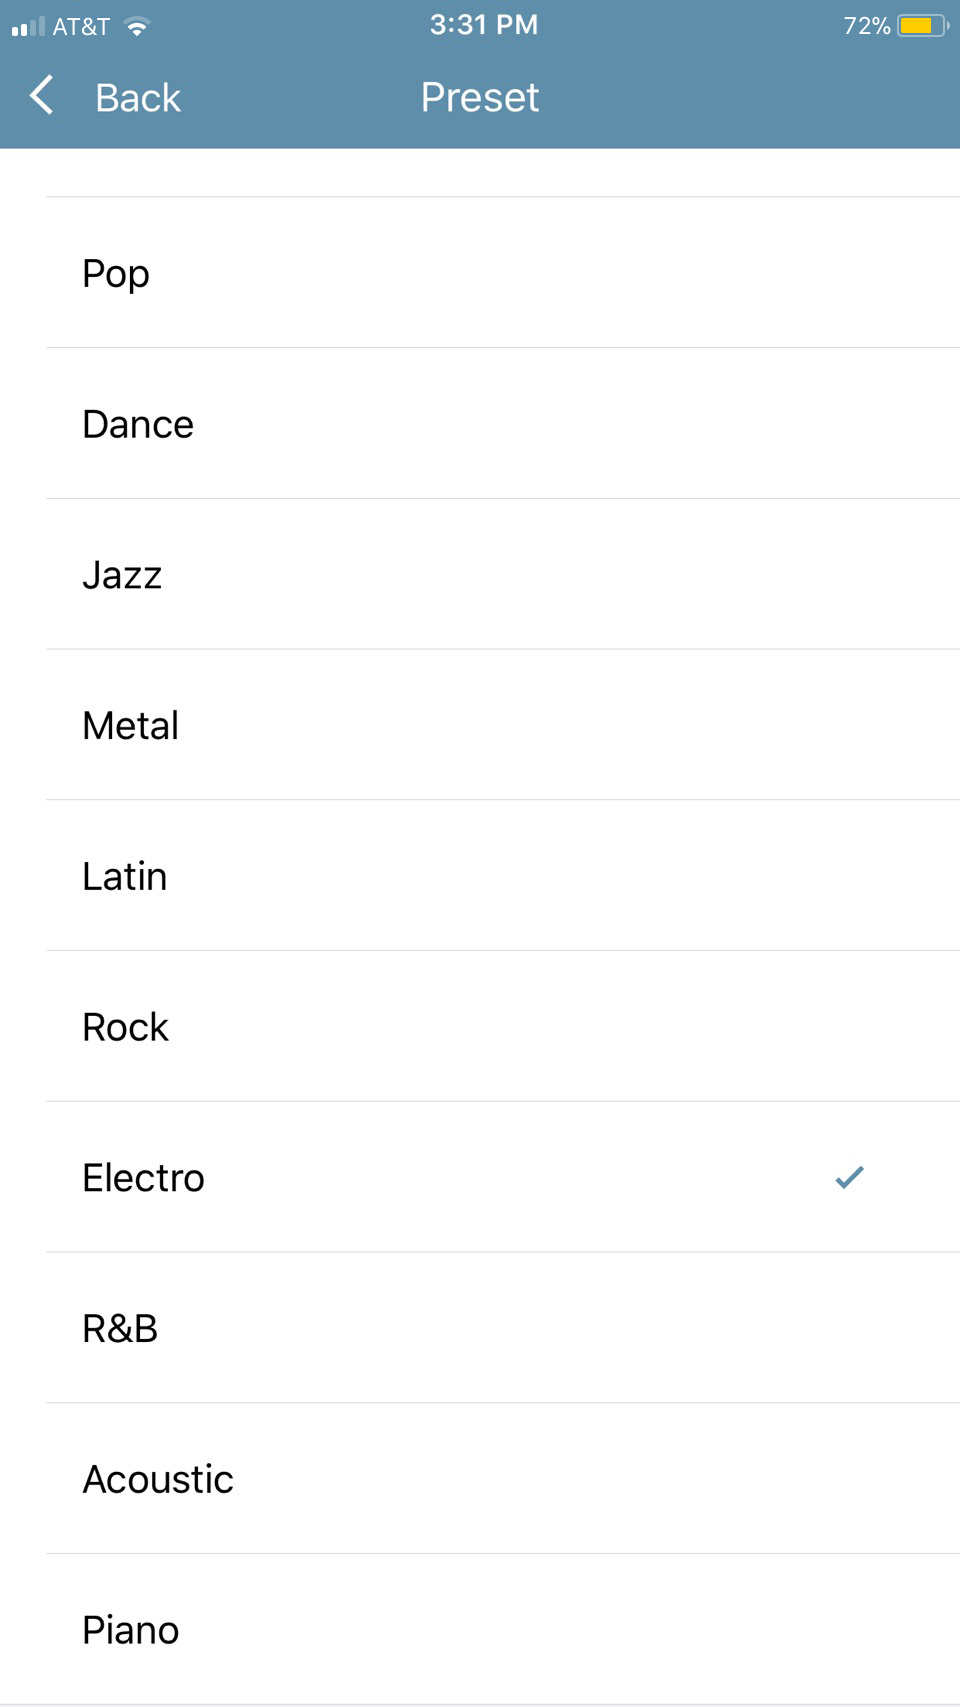 Users can customize their EQ or choose settings already optimized for 11 types of music